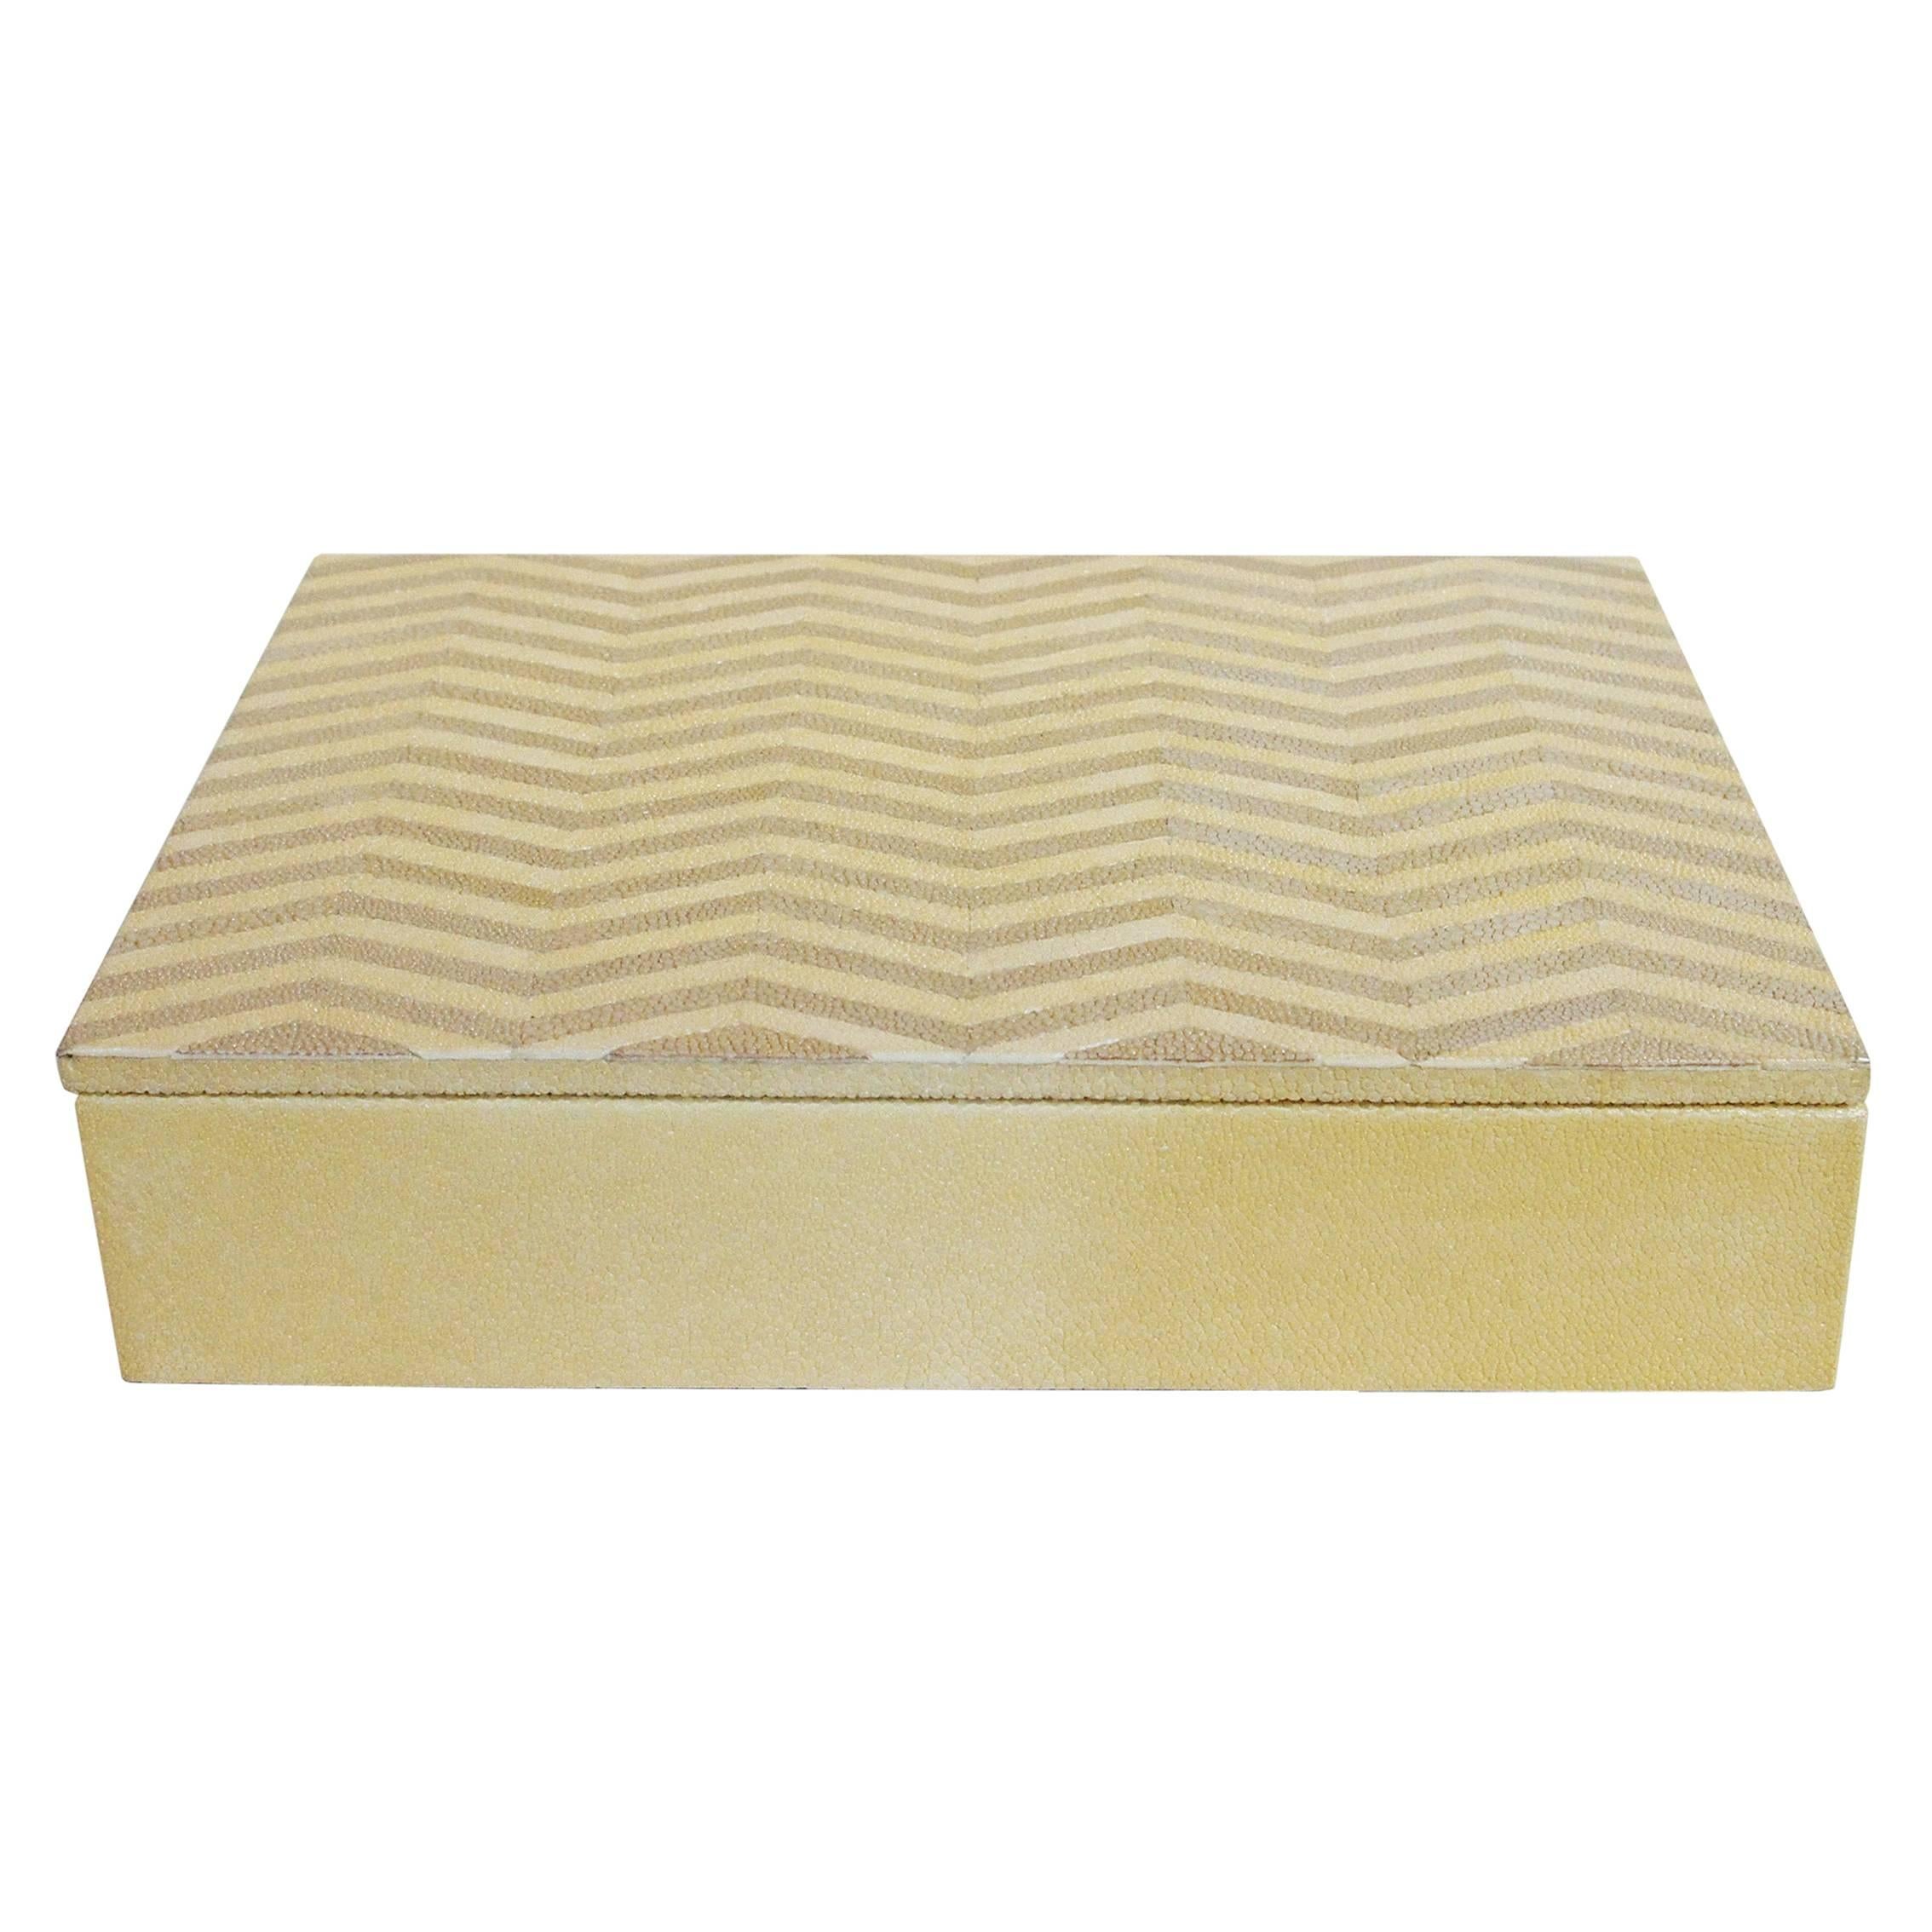 Ivory and Brown Shagreen Box FINAL CLEARANCE SALE